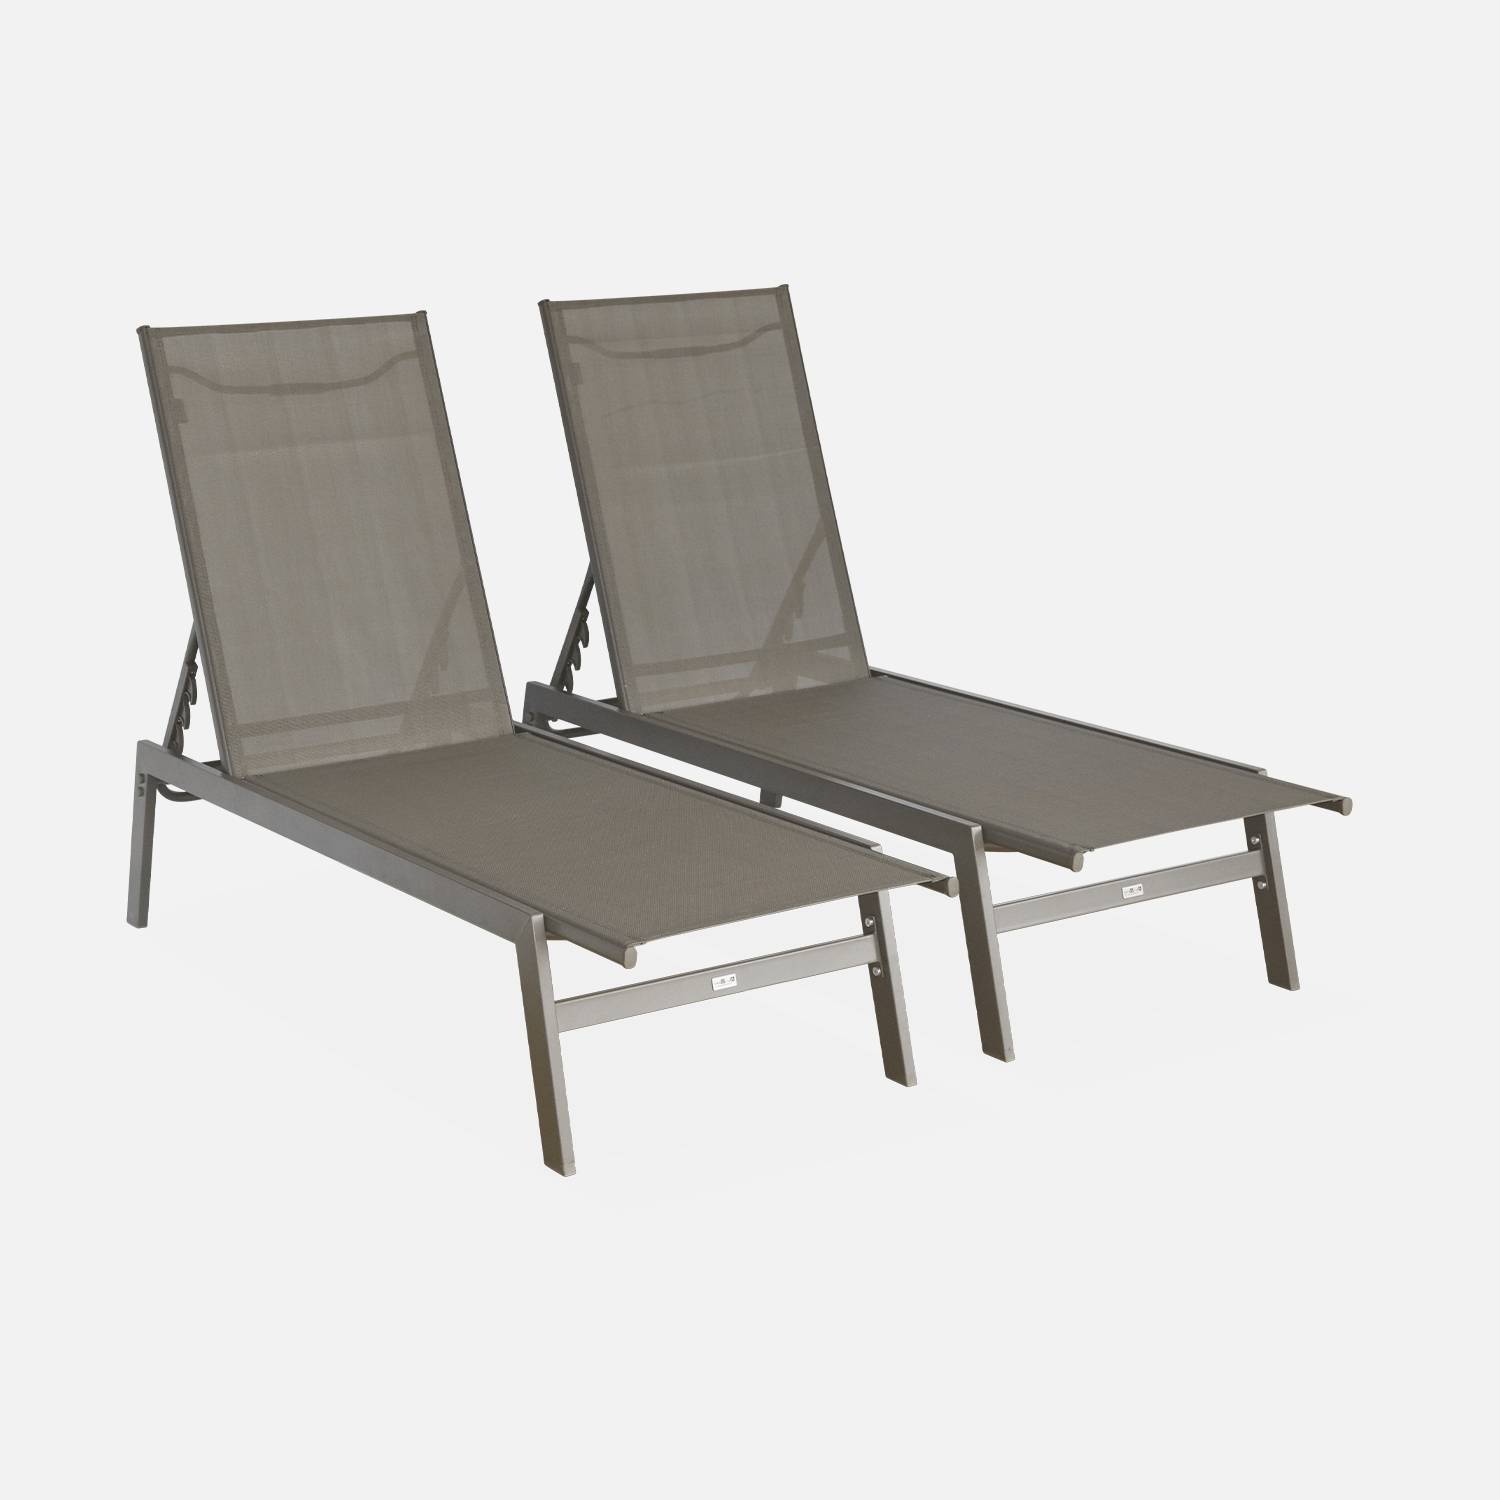 Pair of textilene and metal multi-position loungers | sweeek